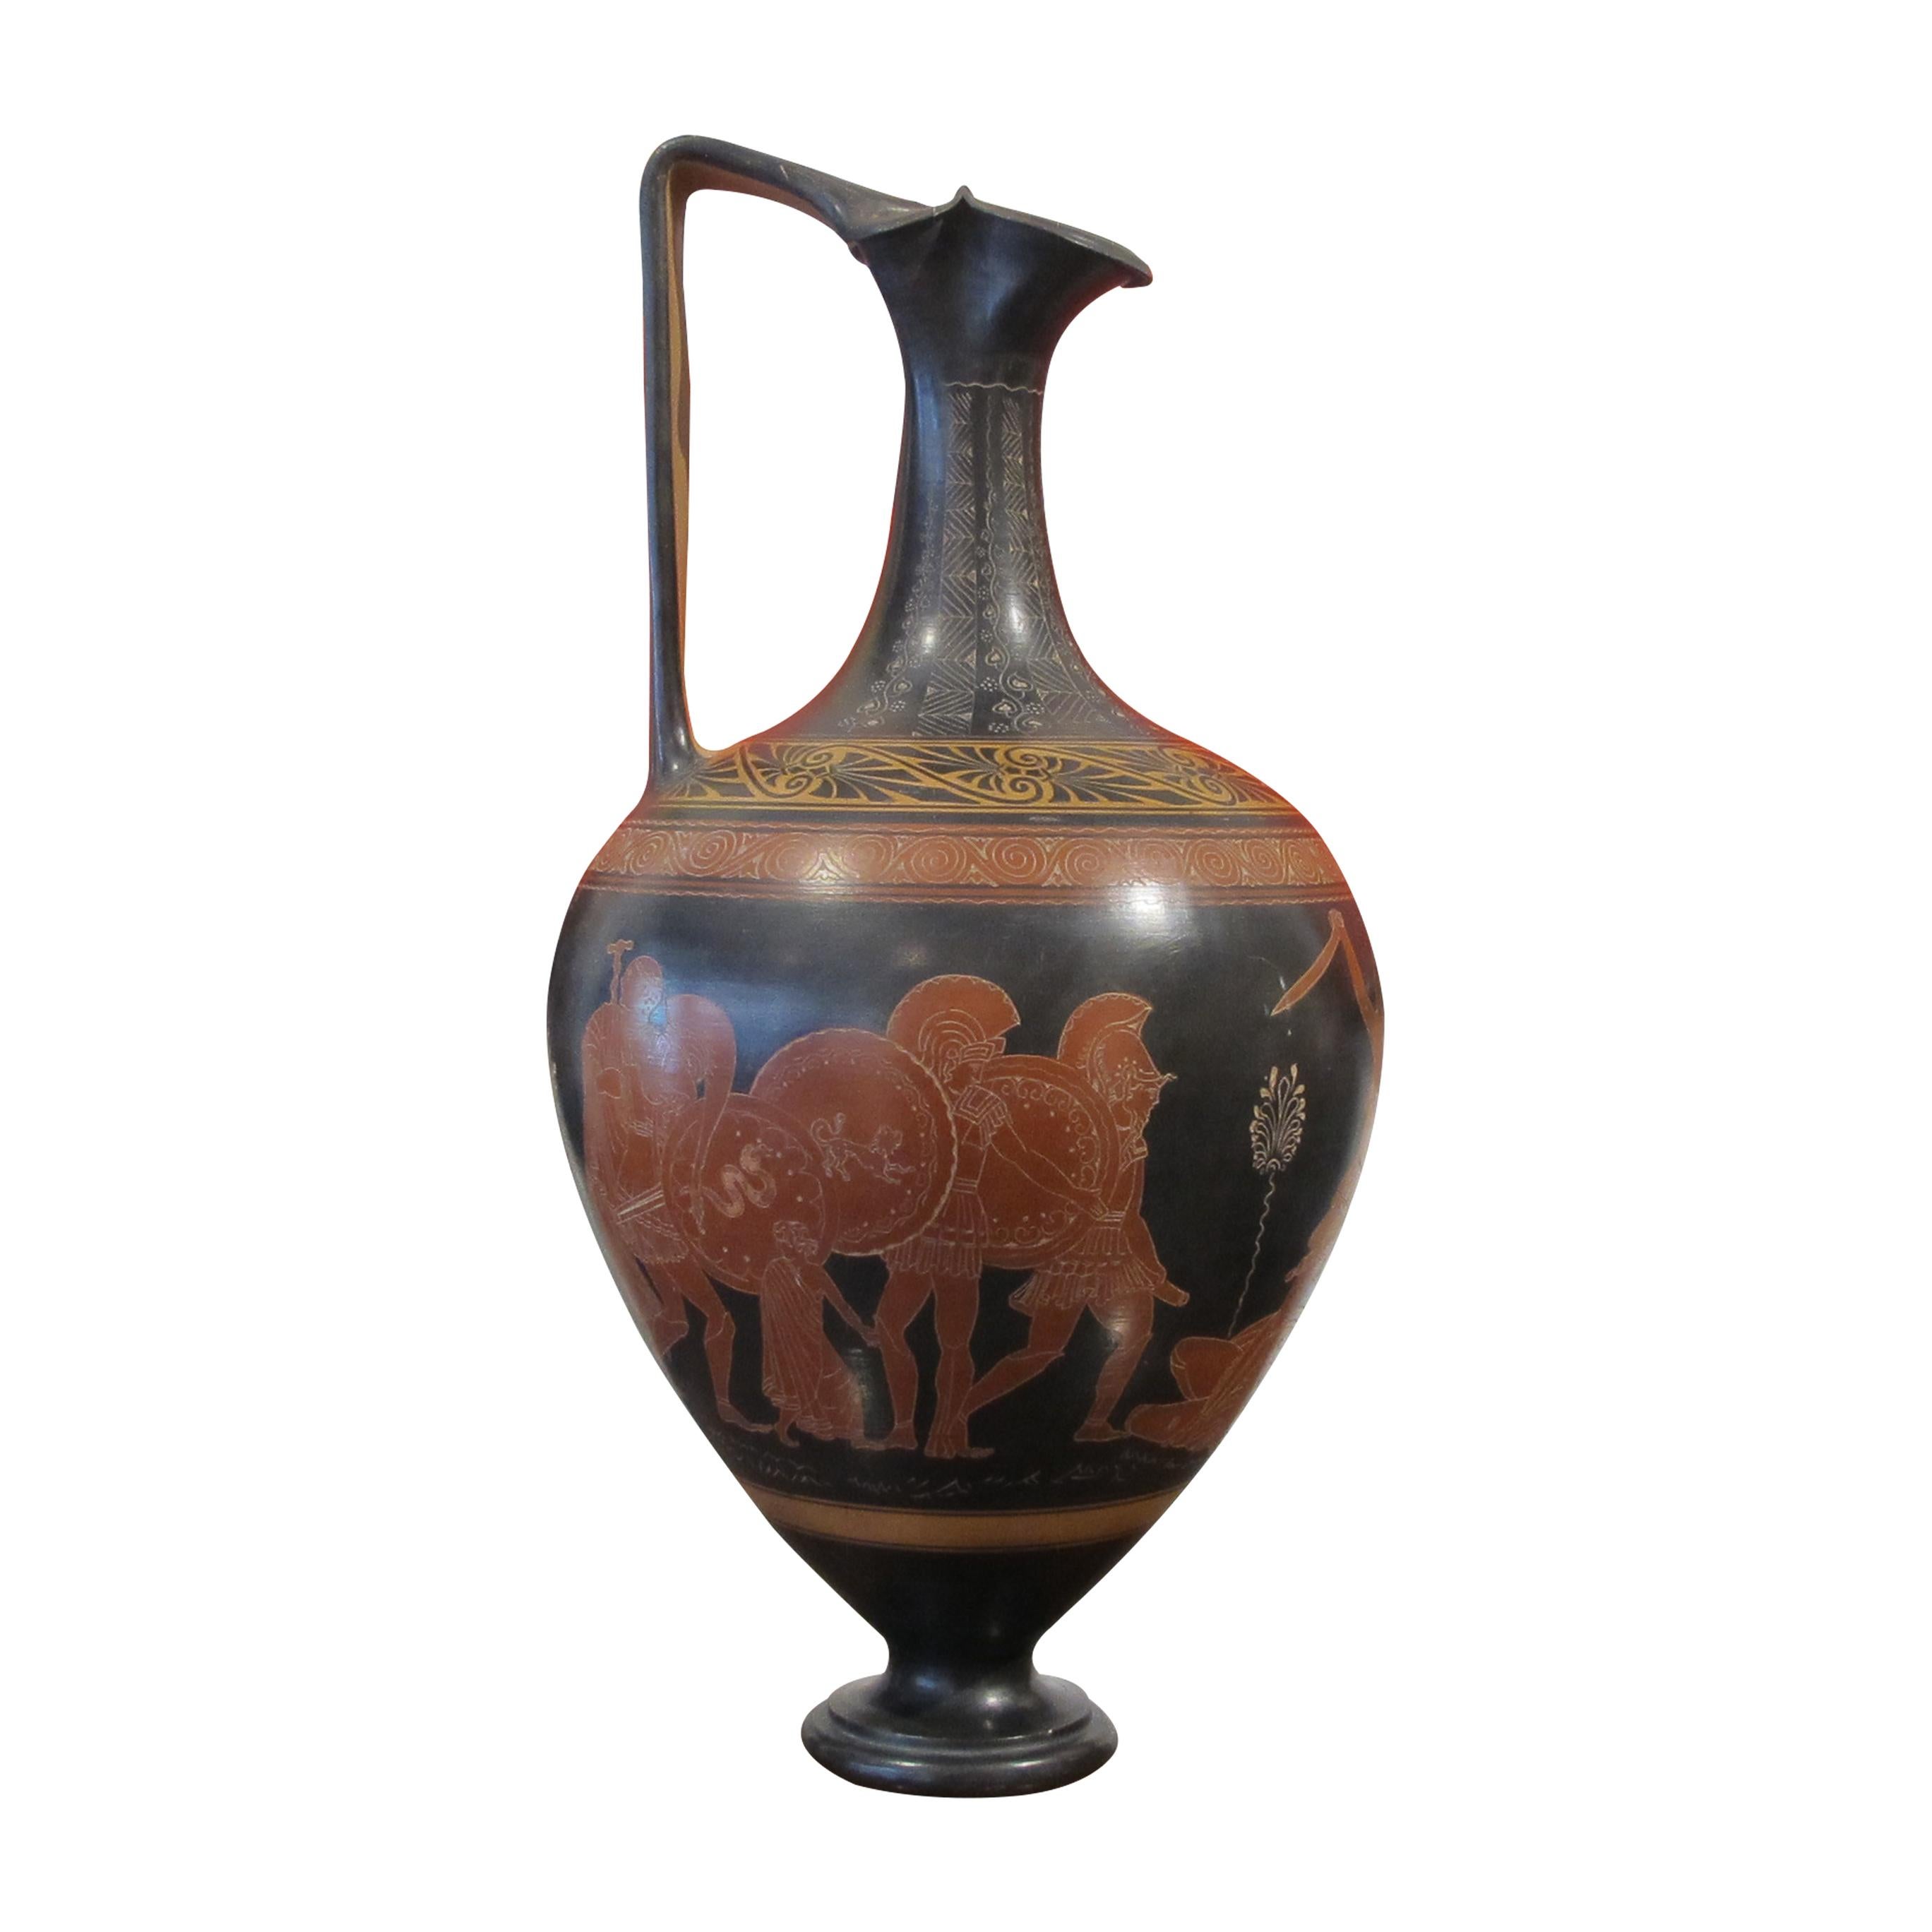 This is a magnificent set 3 of highly decorative early 20th Century Etruscan style vases also known as black-figure pottery painting. Figures and ornaments were painted on the vessel's body using shapes and colours reminiscent of silhouettes.